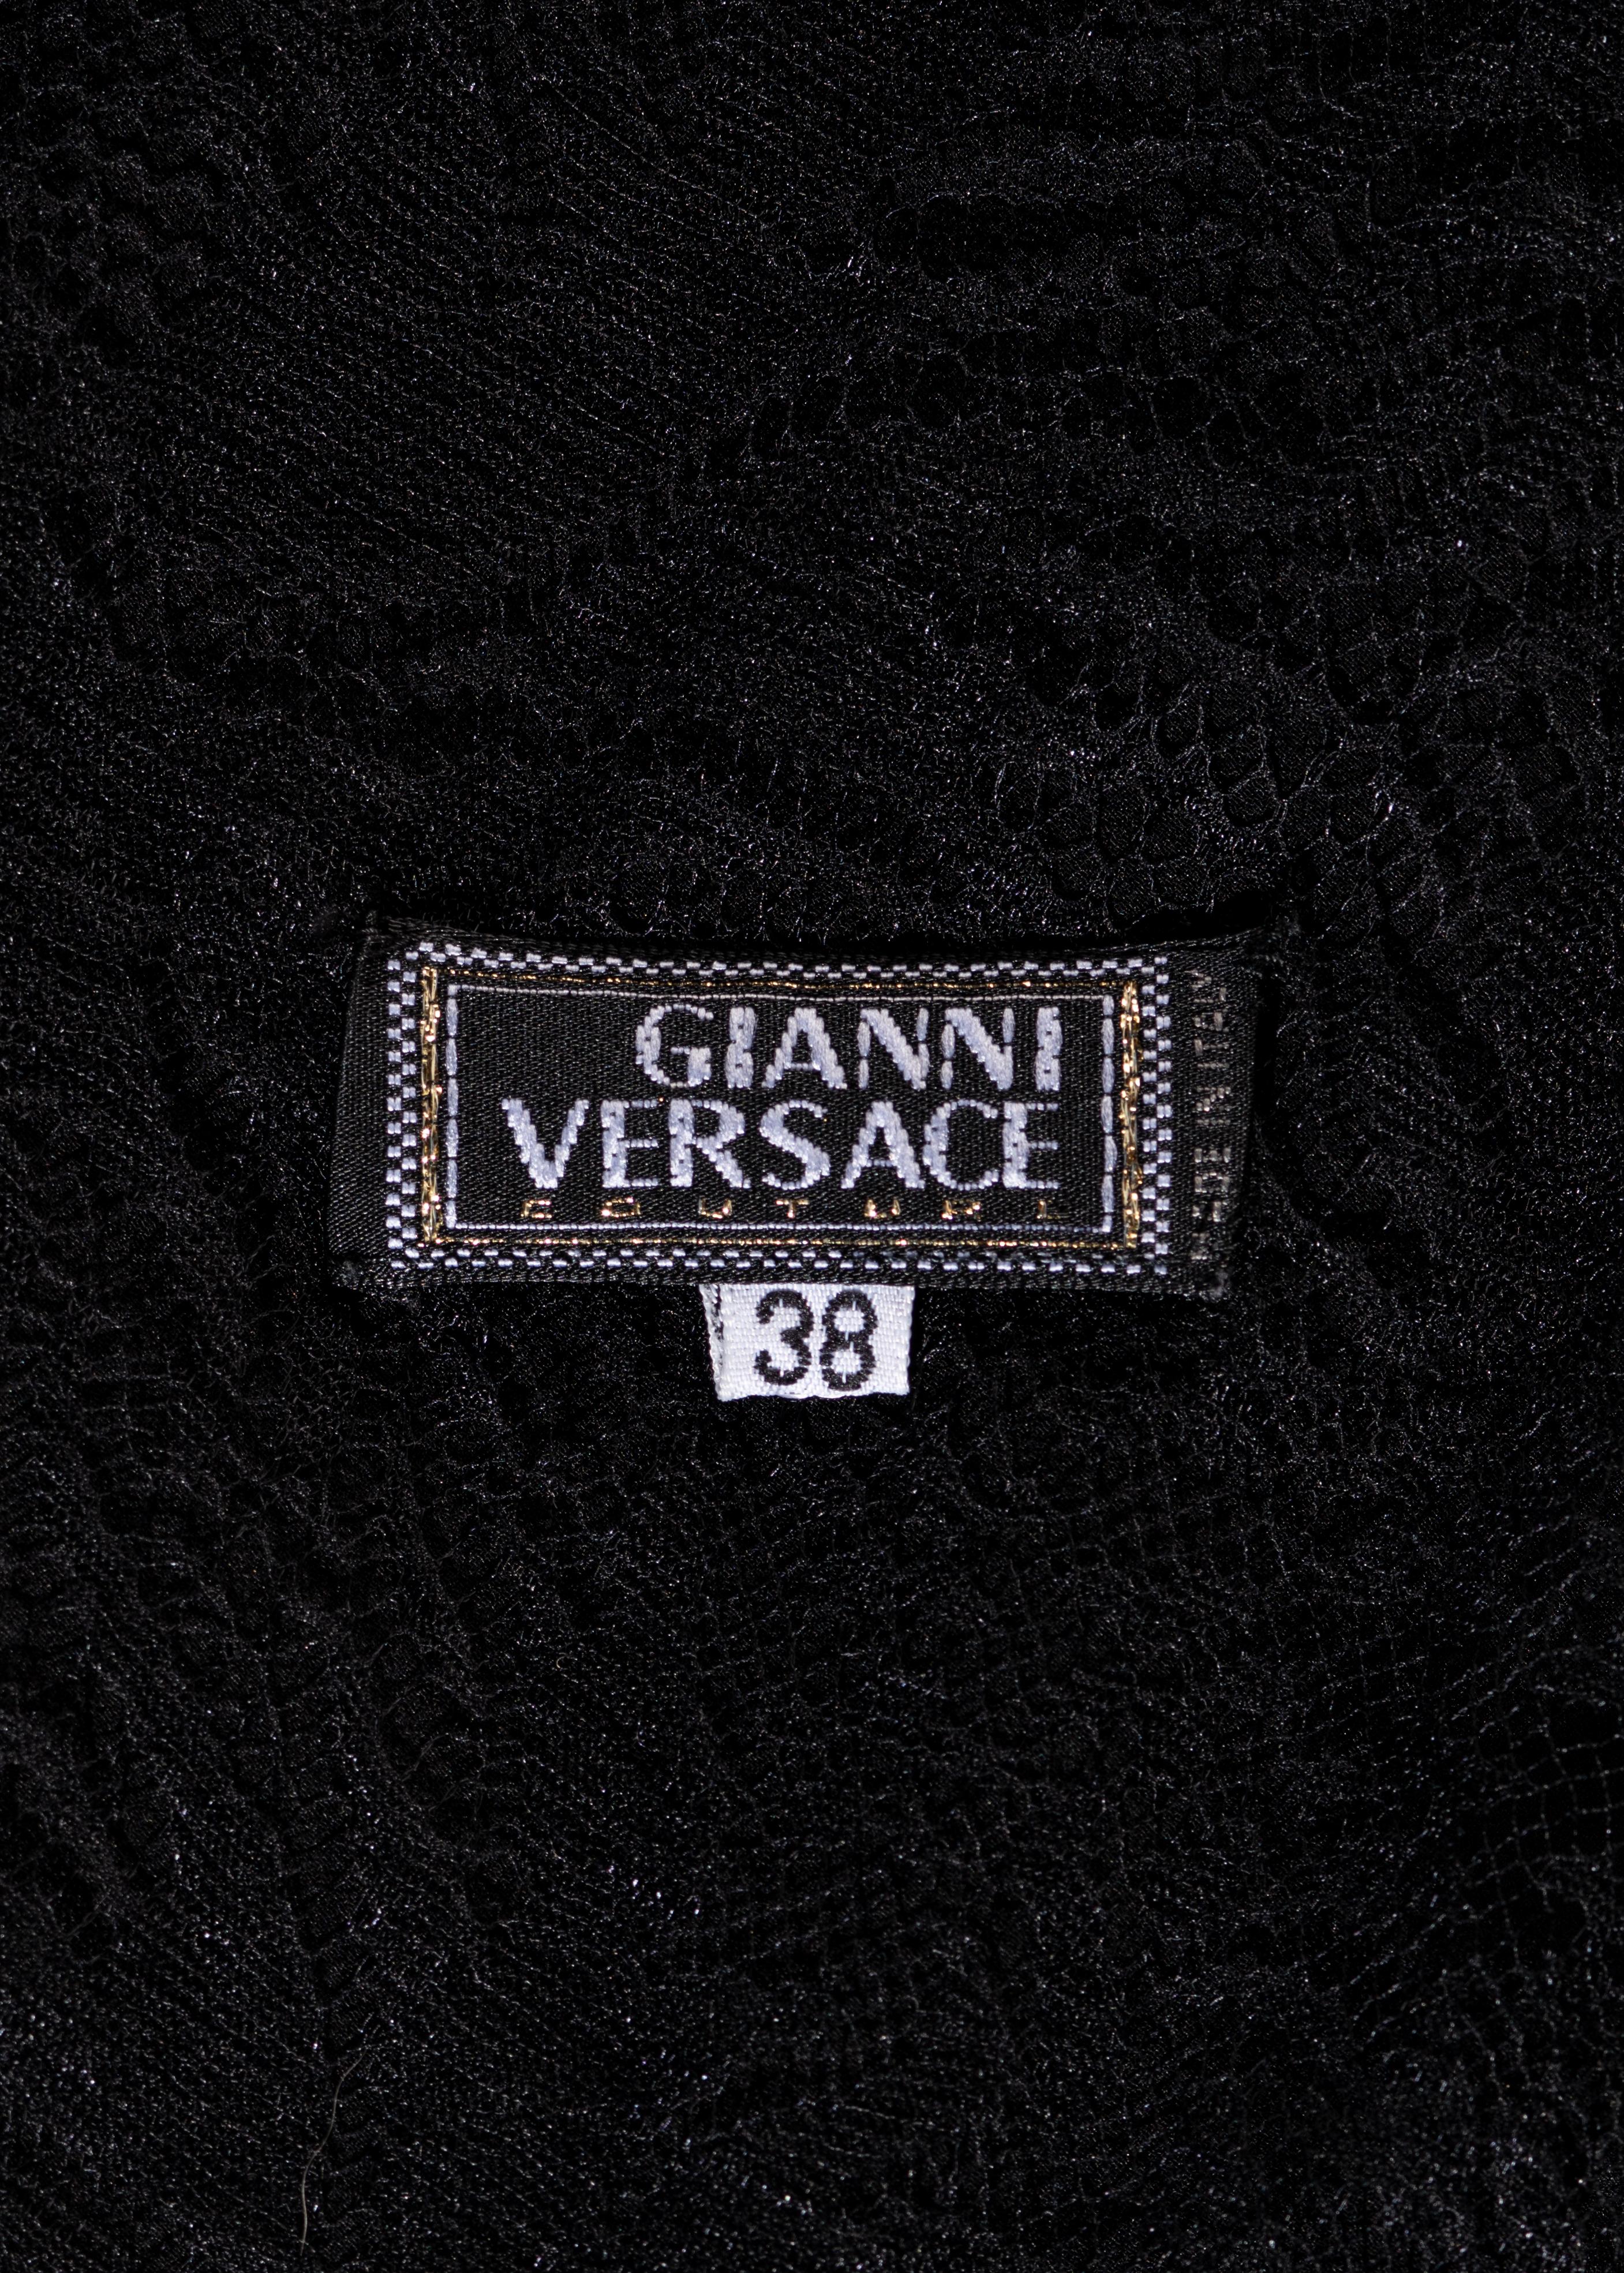 Gianni Versace black silk evening wrap dress with lace underlay, fw 2000 For Sale 3